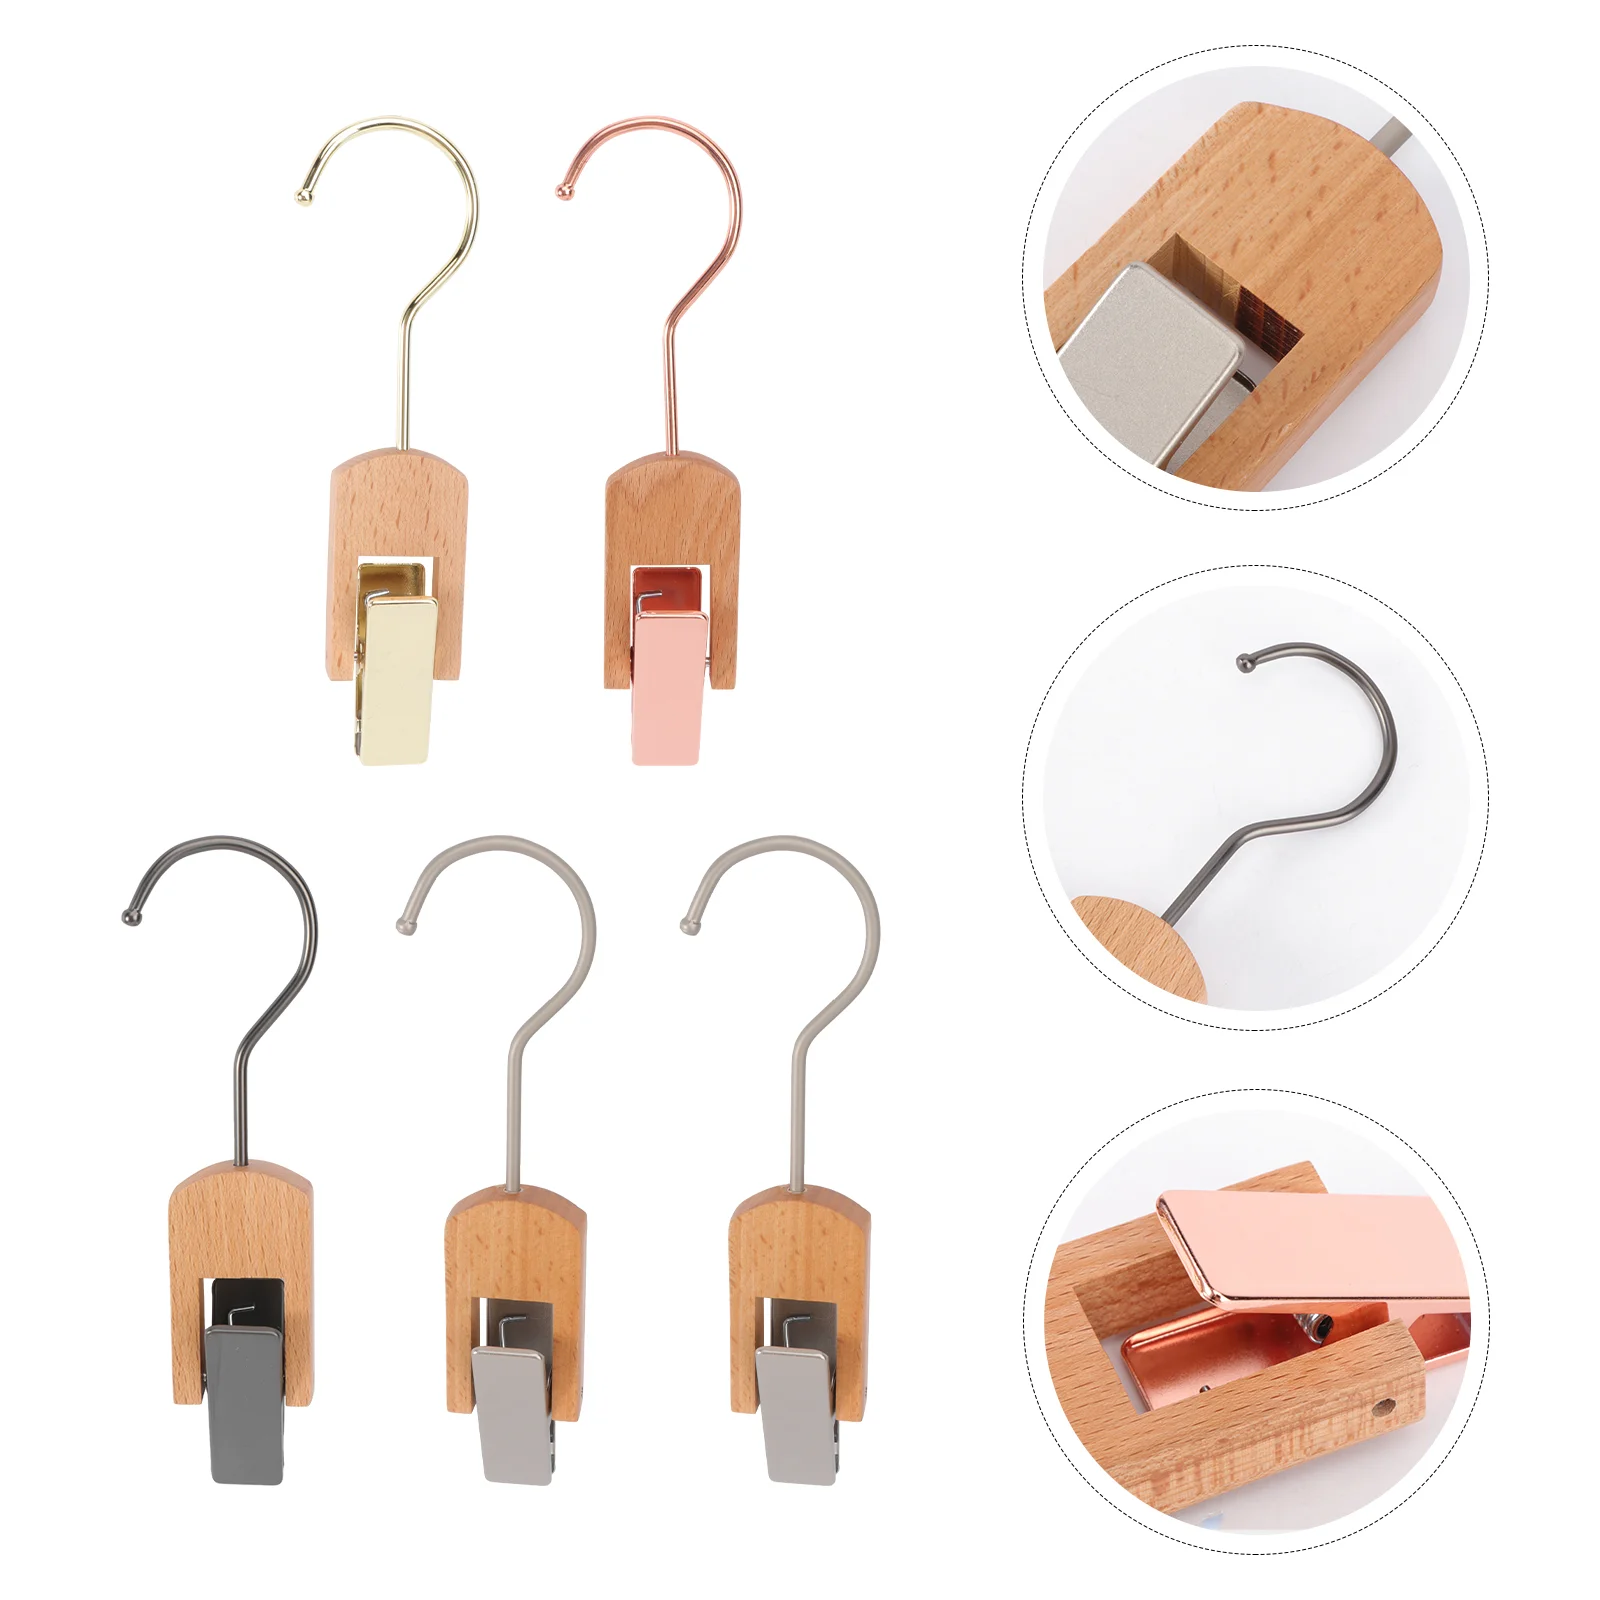 

Clip Hanger Clips Laundry Hanging Hook Boot Hangers Clothespins Hooks Woodenclothes Pegs Holdersocks Wood Cloth Sock Closet